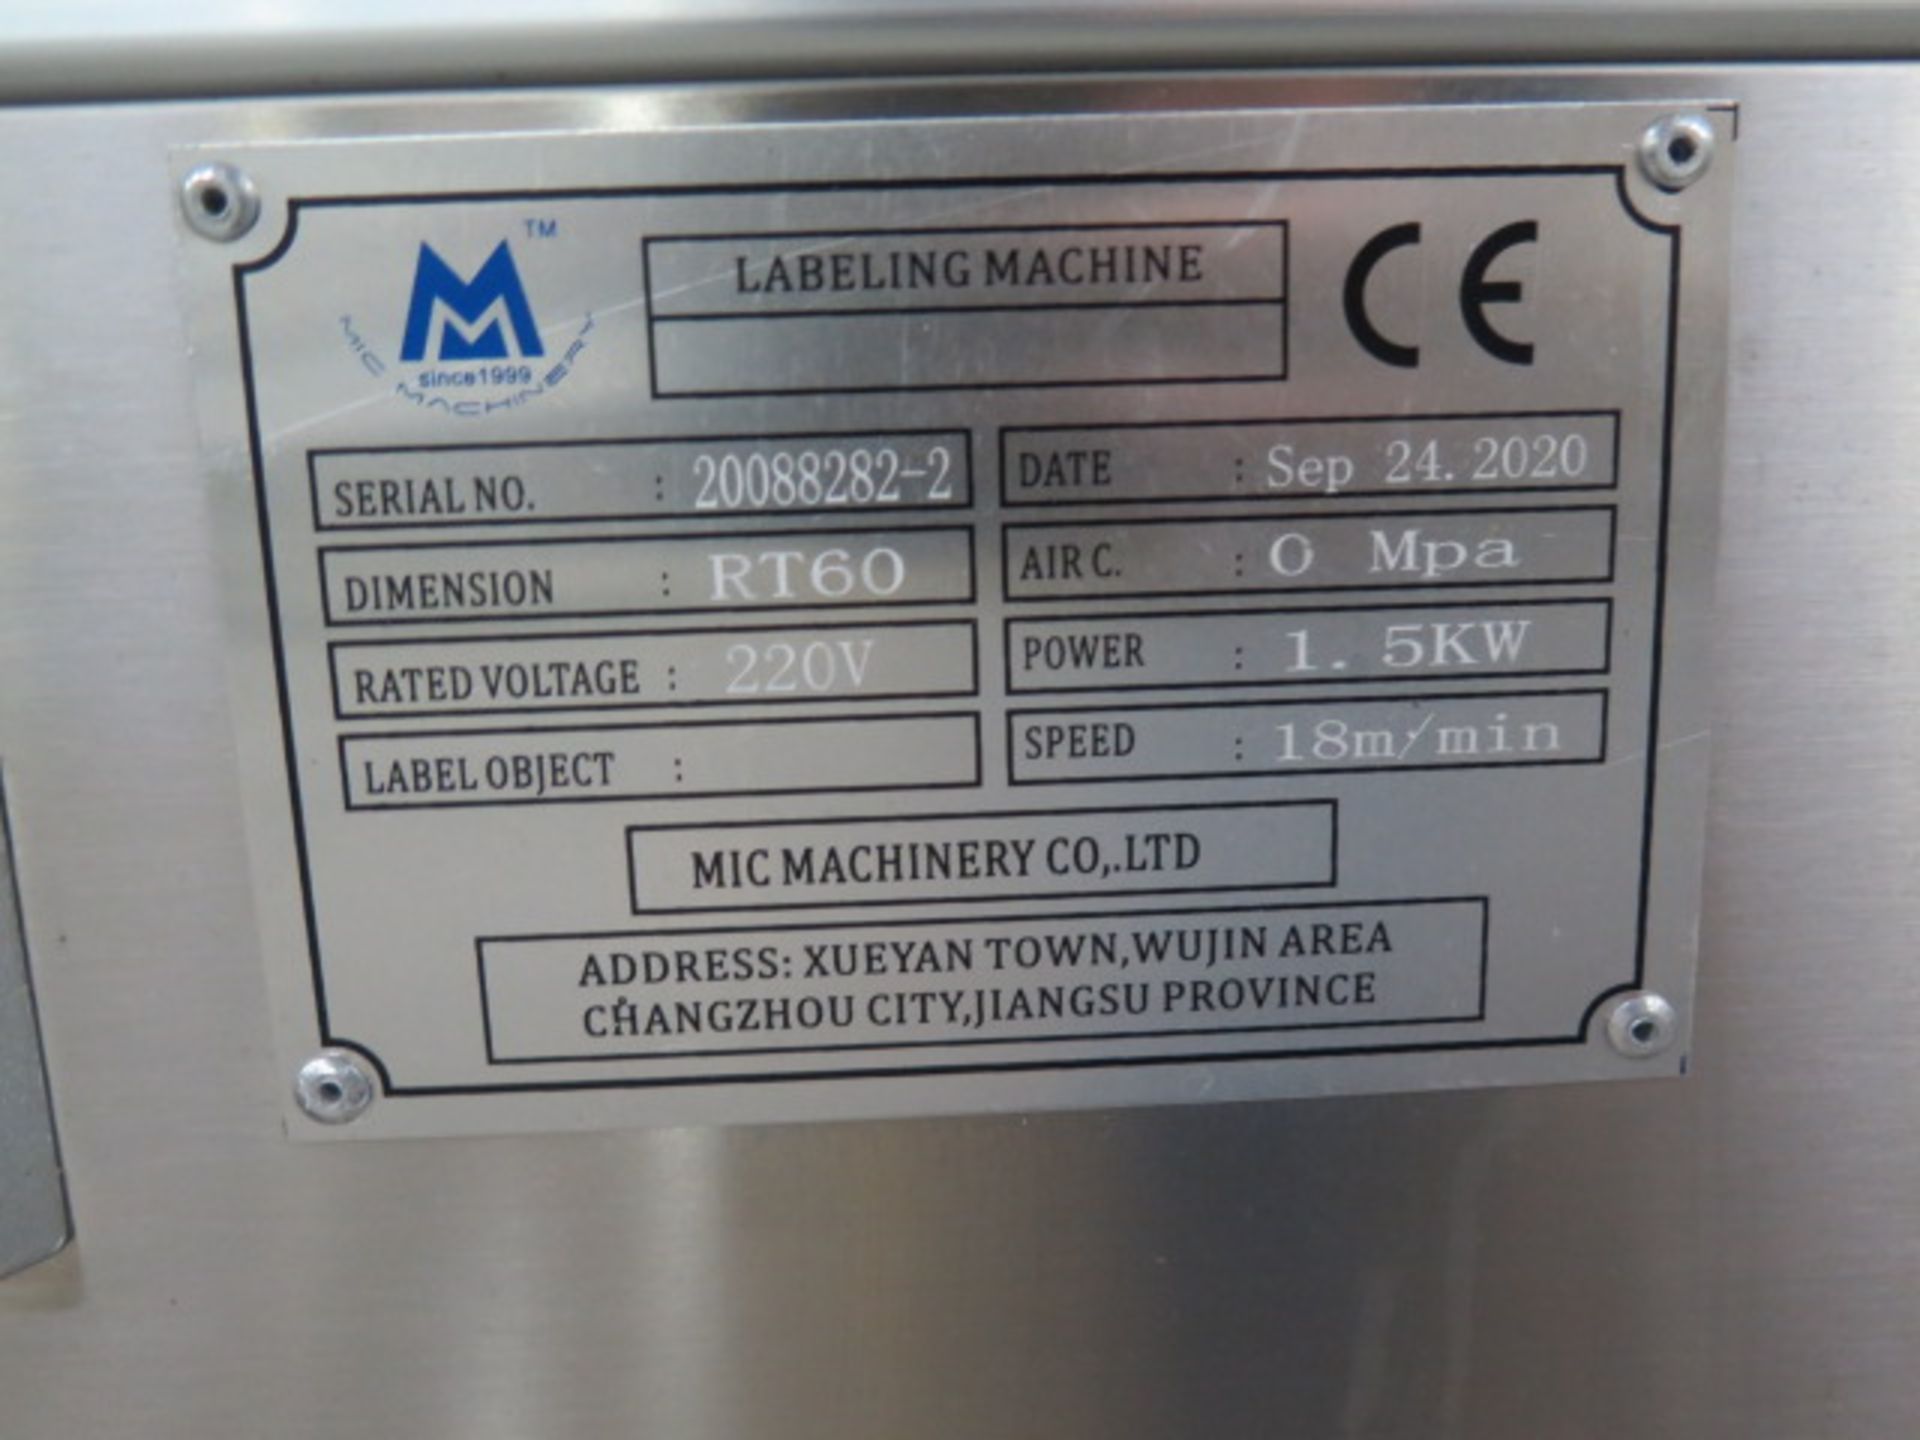 Line 5 : 2019 Capmatic “Patriot” Filling and Capping Line w/ Capmatic PLC Controls, SOLD AS IS - Image 37 of 38